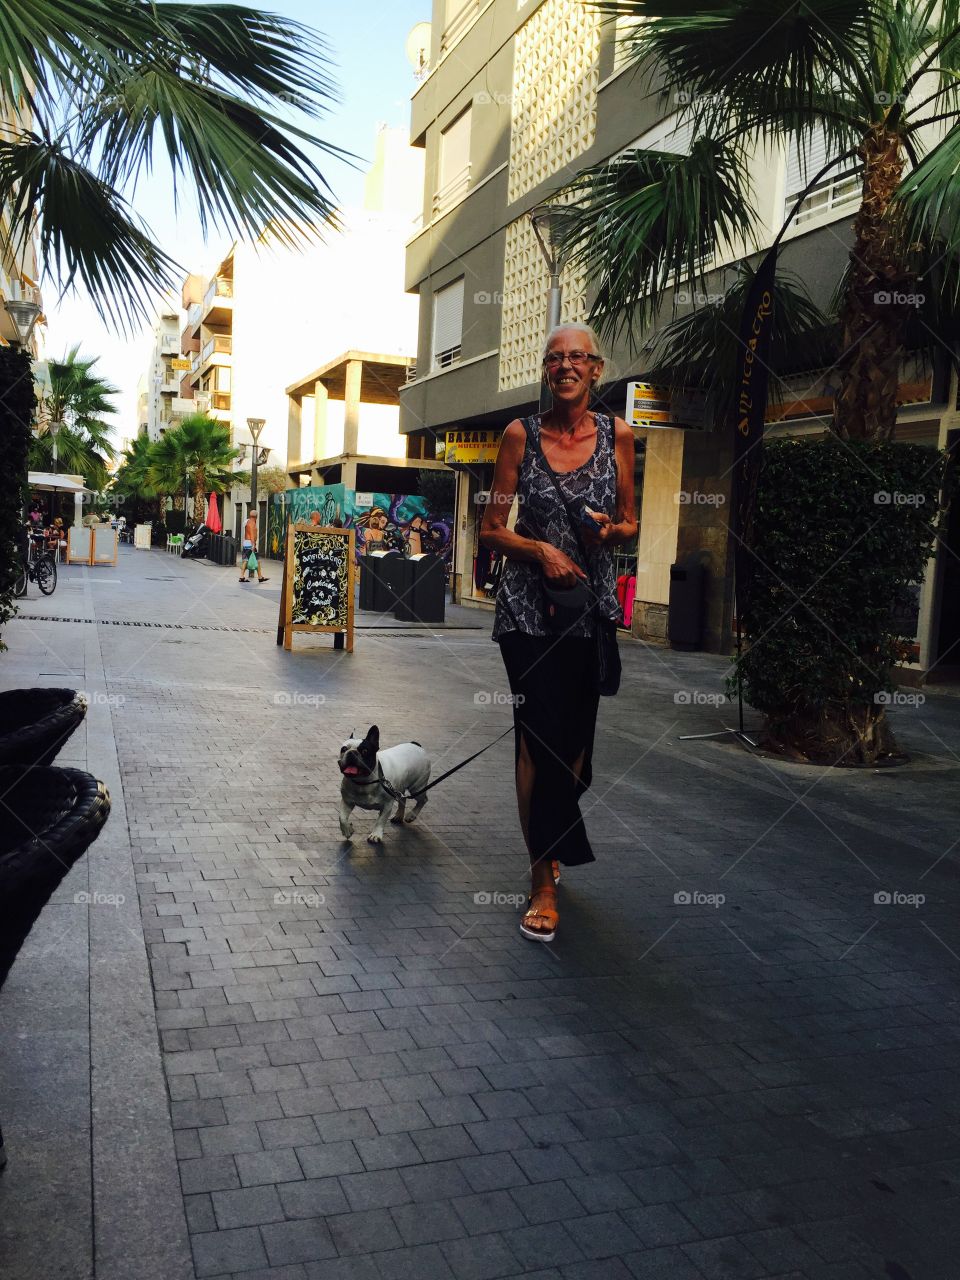 Mom walking our frenchie. This is the french bulldog presley & her mommy out for a walk in sunny torrevieja, Spain
